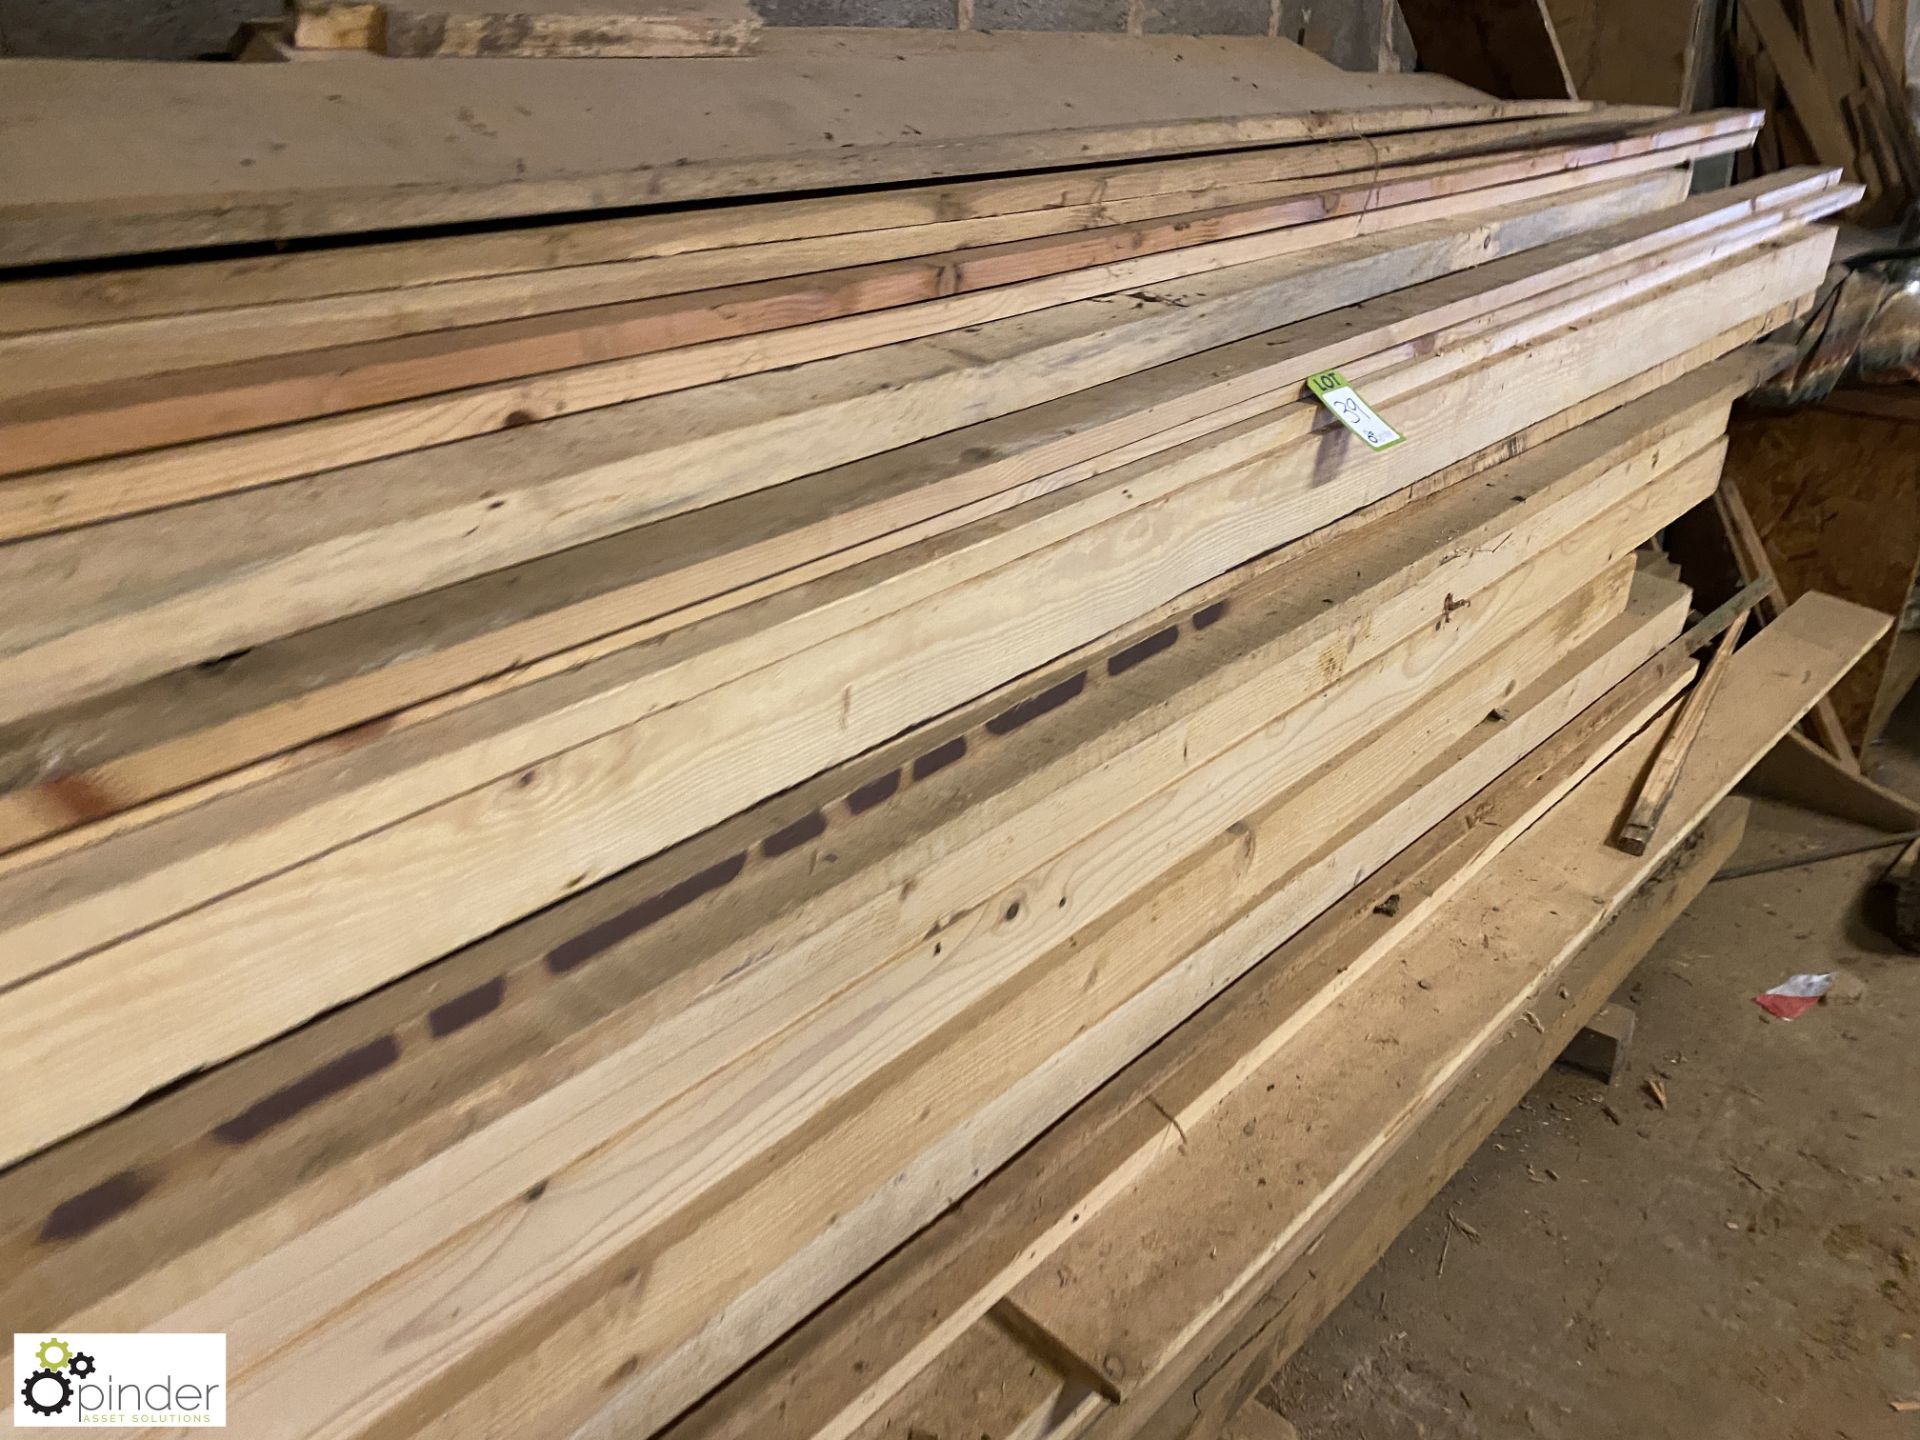 Large quantity Softwood/Hardwood Cut Beams, Boards and Lengths, up to 4000mm - Image 6 of 9